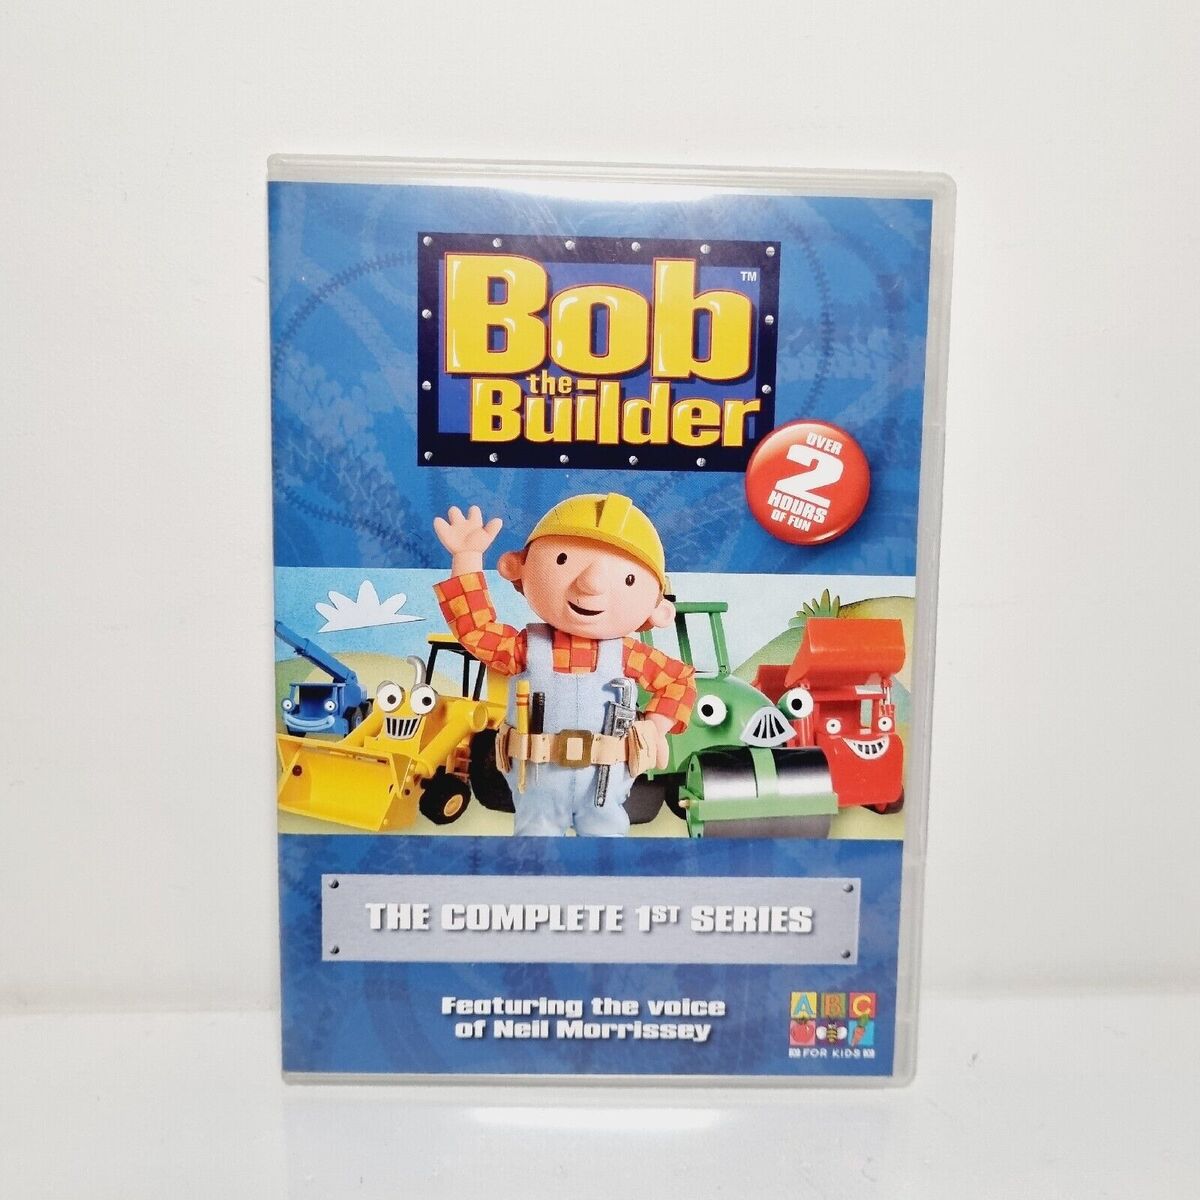 Bob the Builder - The Complete 1st Series | ABC For Kids Wiki | Fandom